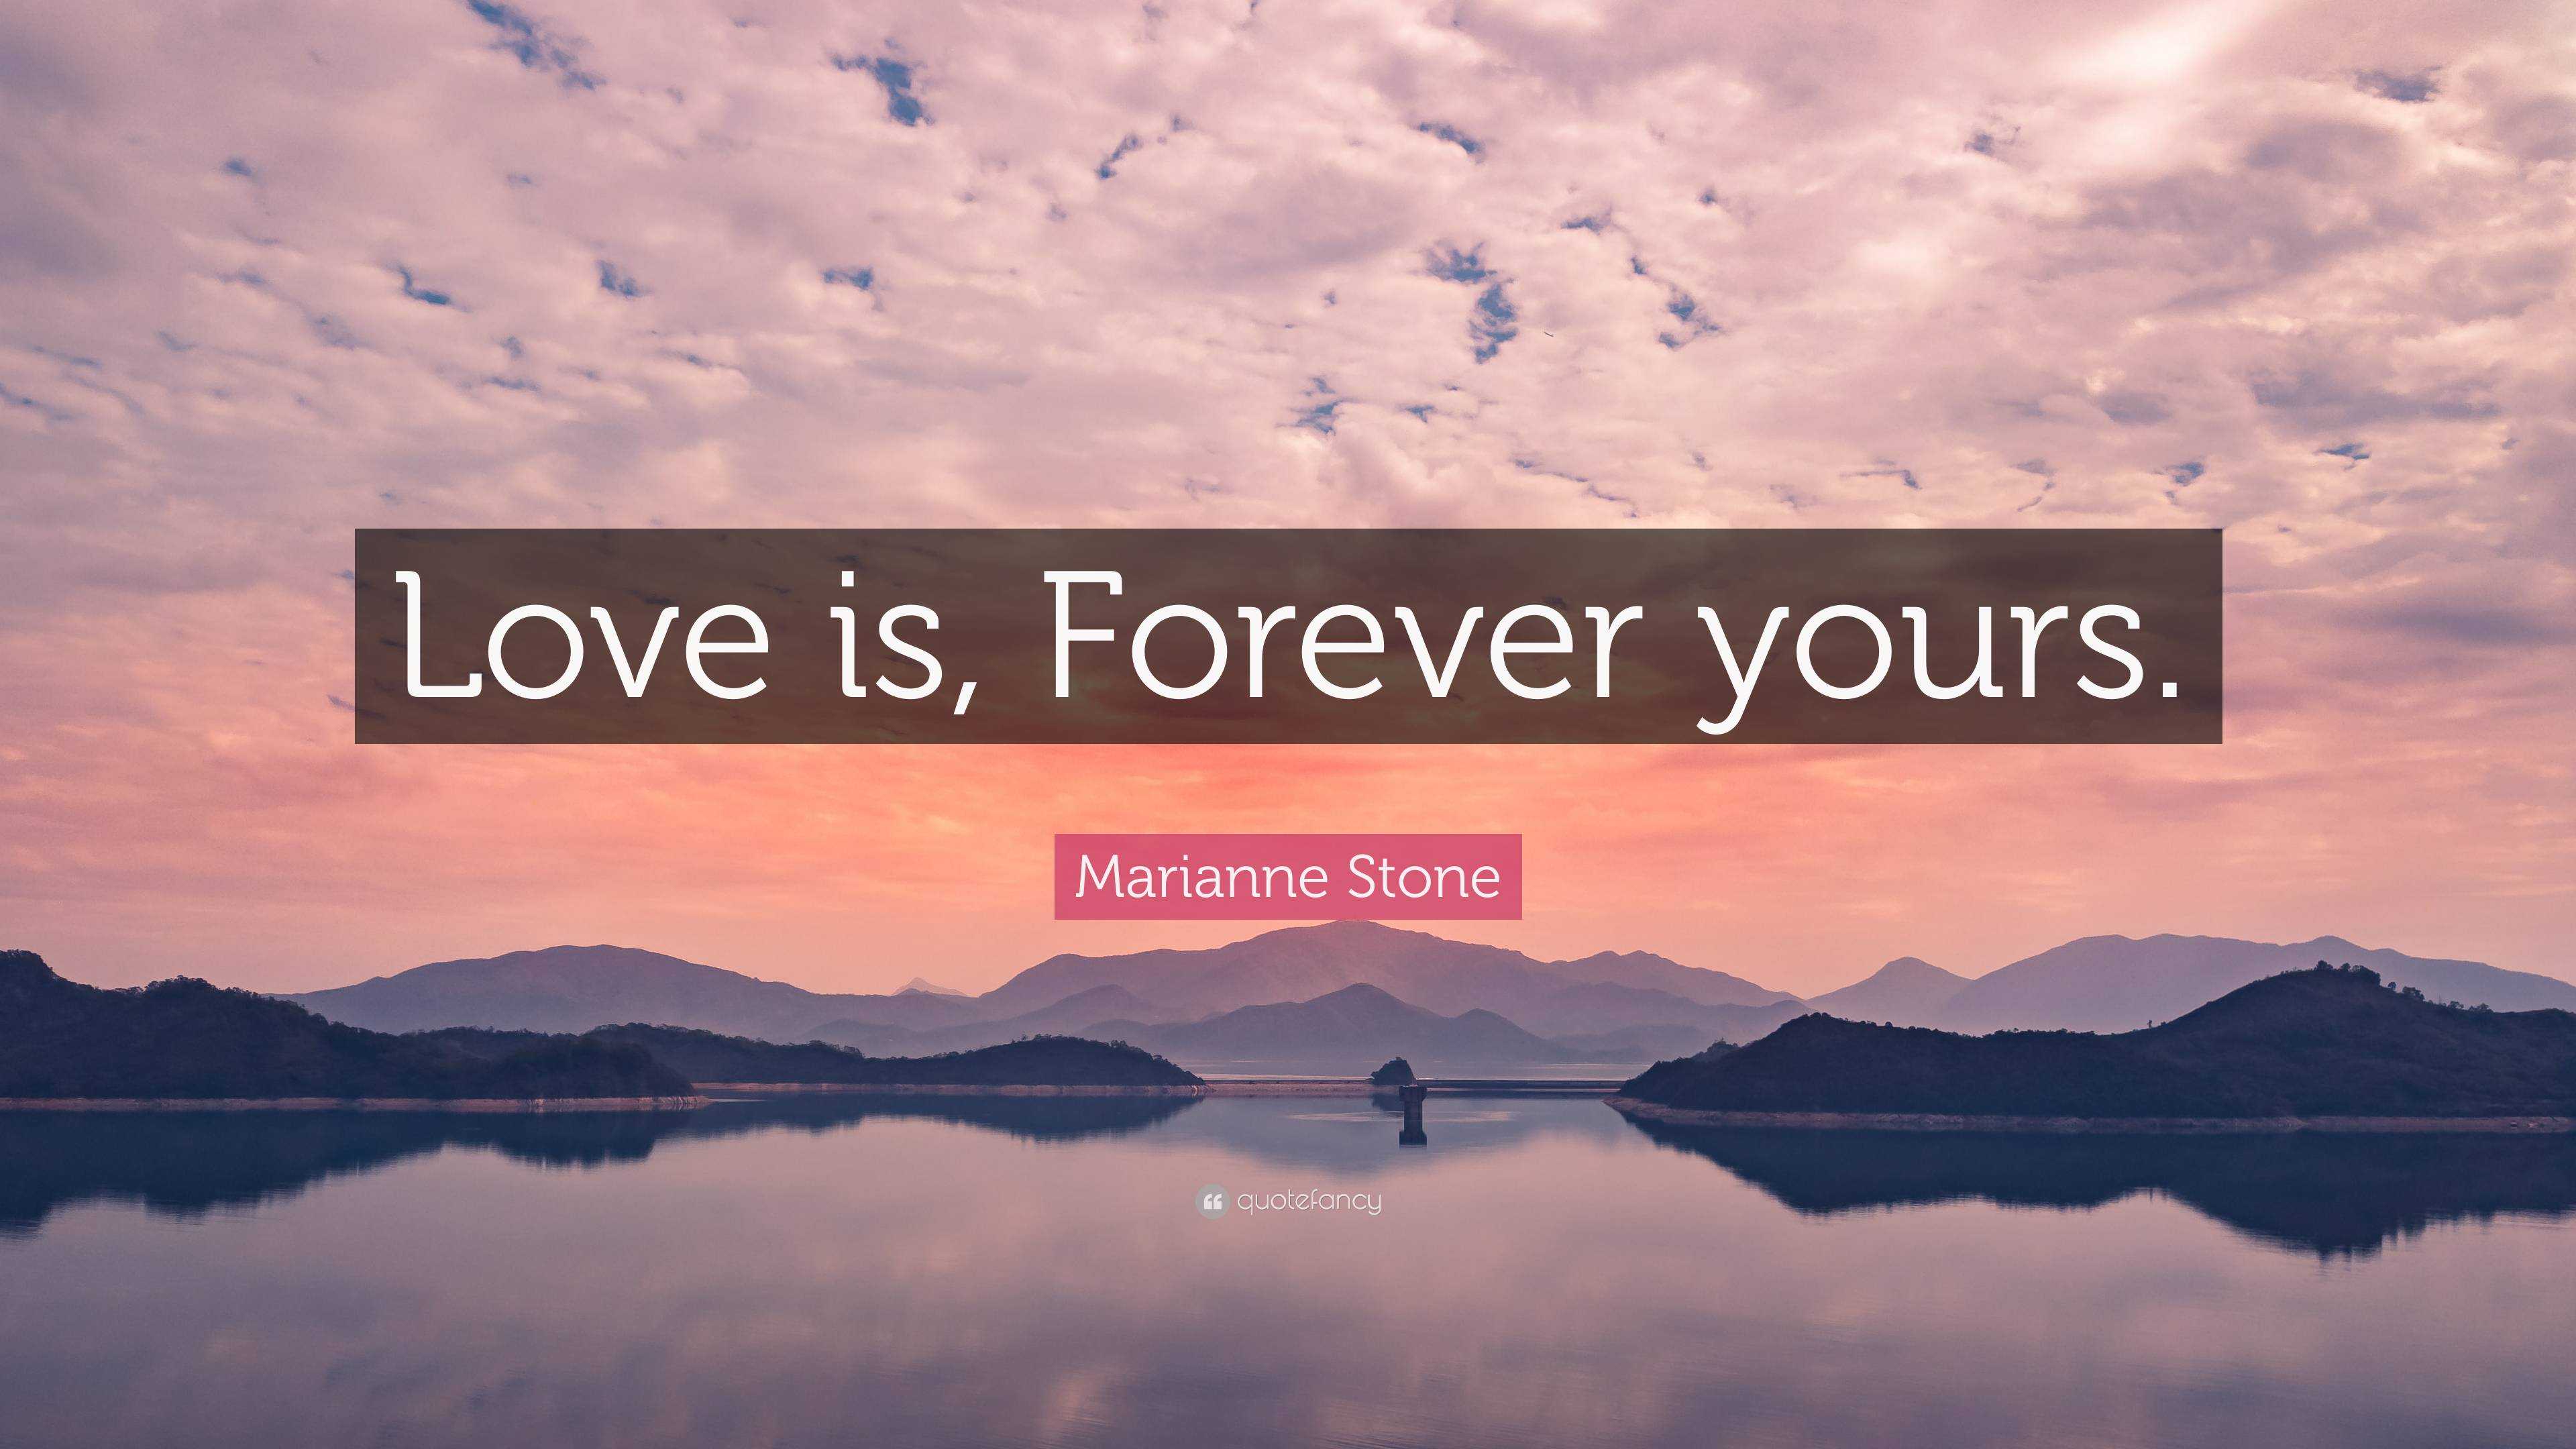 Marianne Stone Quote: “Love is, Forever yours.”